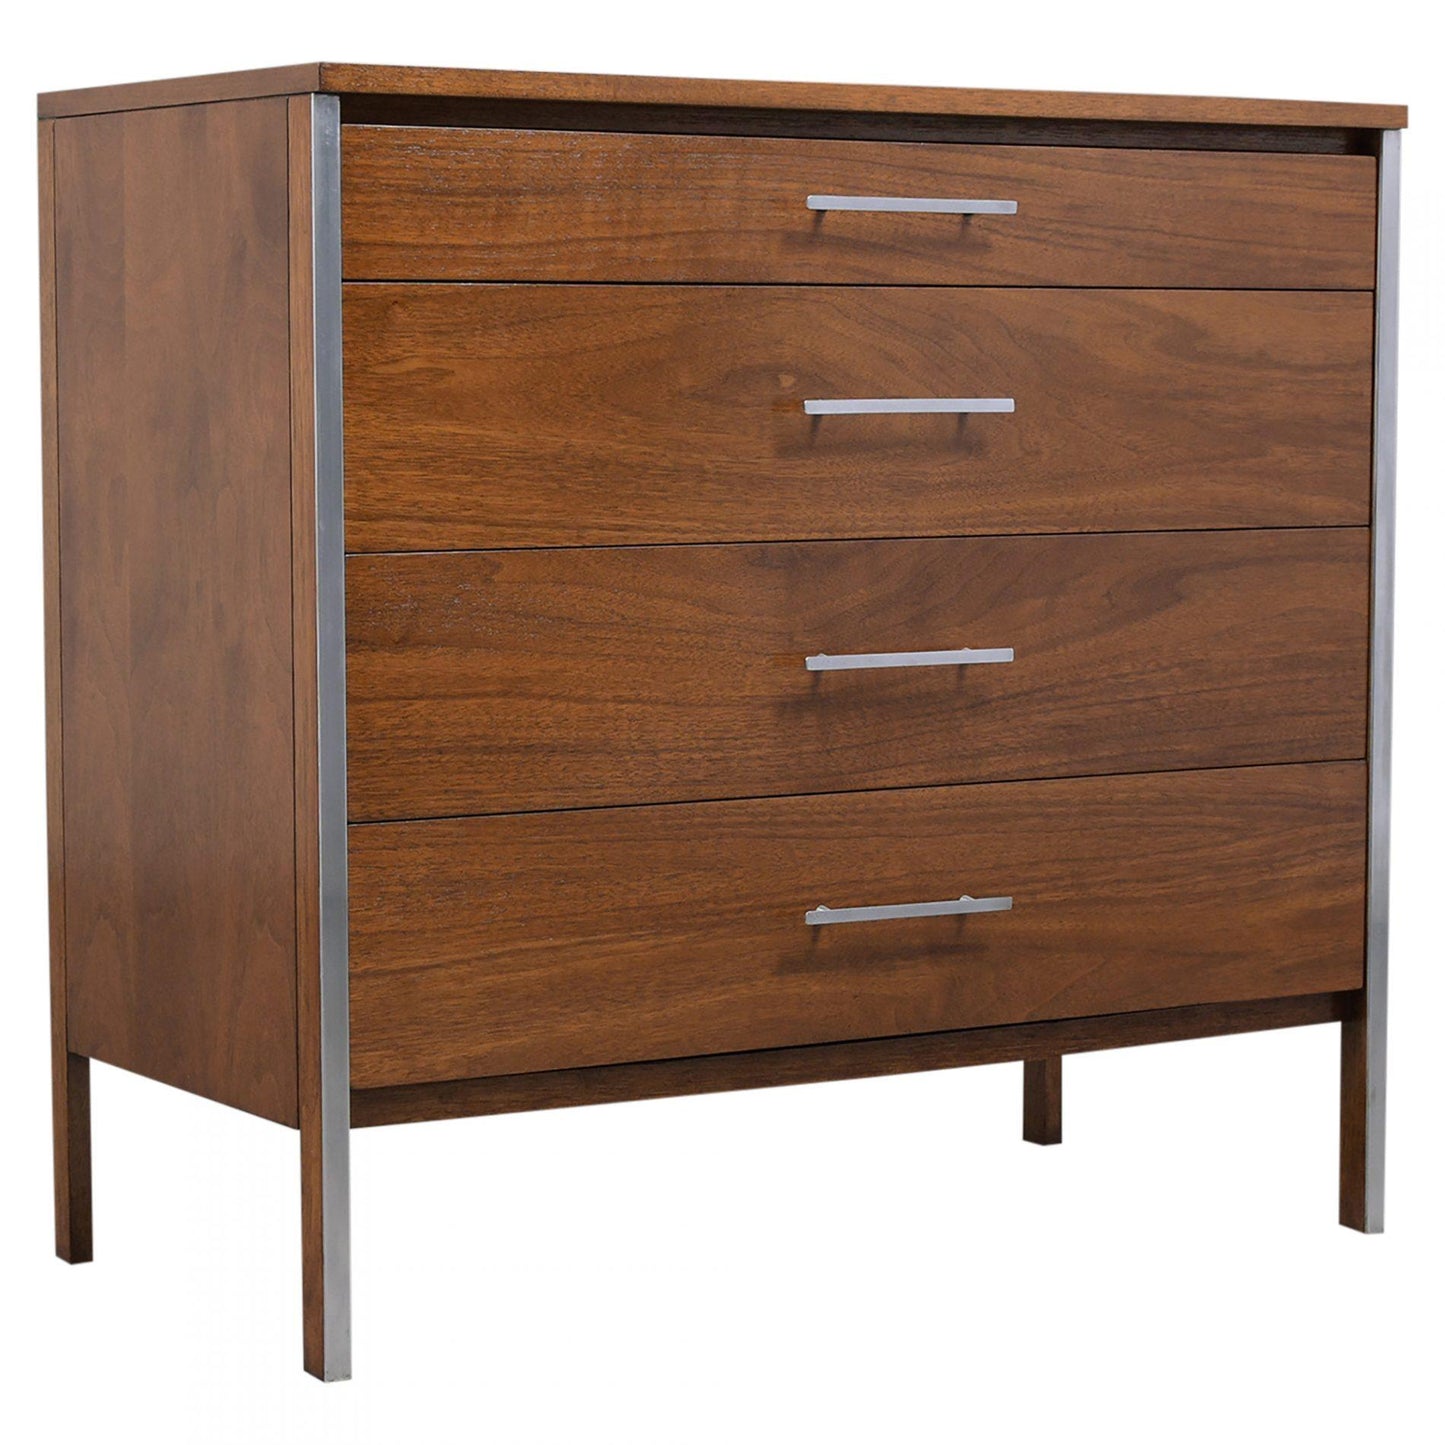 Vintage Mid-Century Modern Lacquered Chest of Drawers